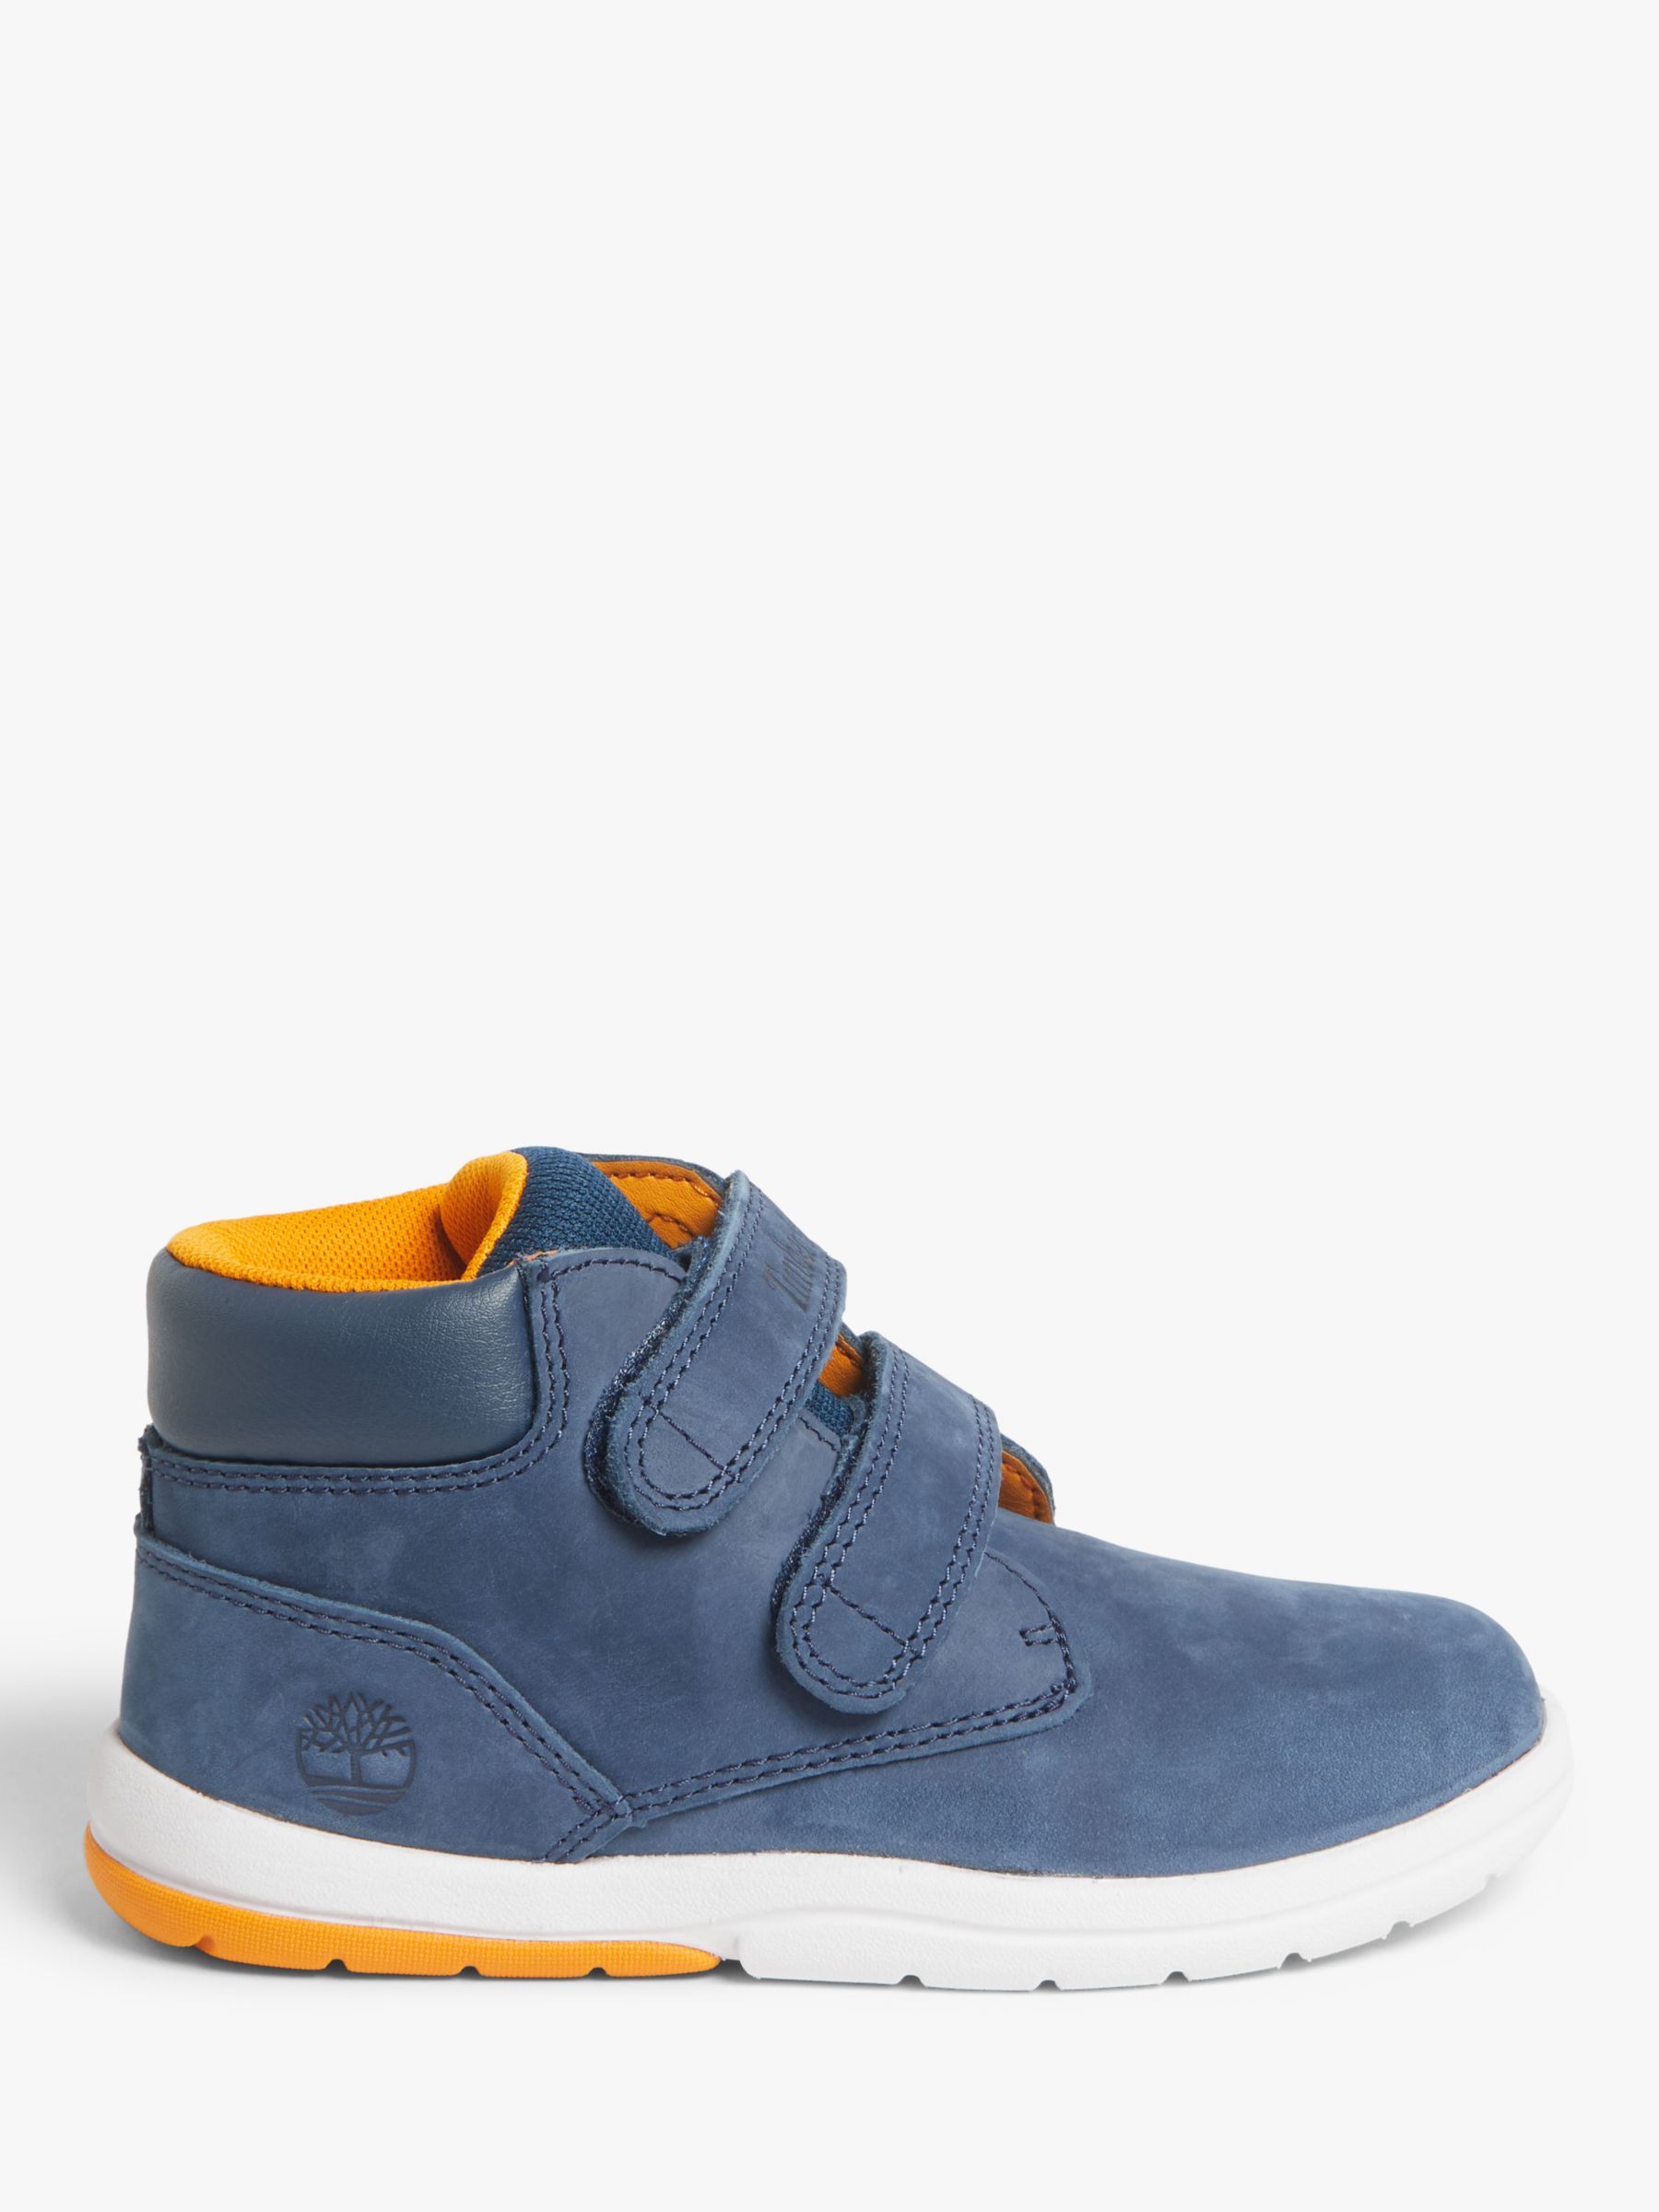 Timberland Kids' Toddle Track Boots